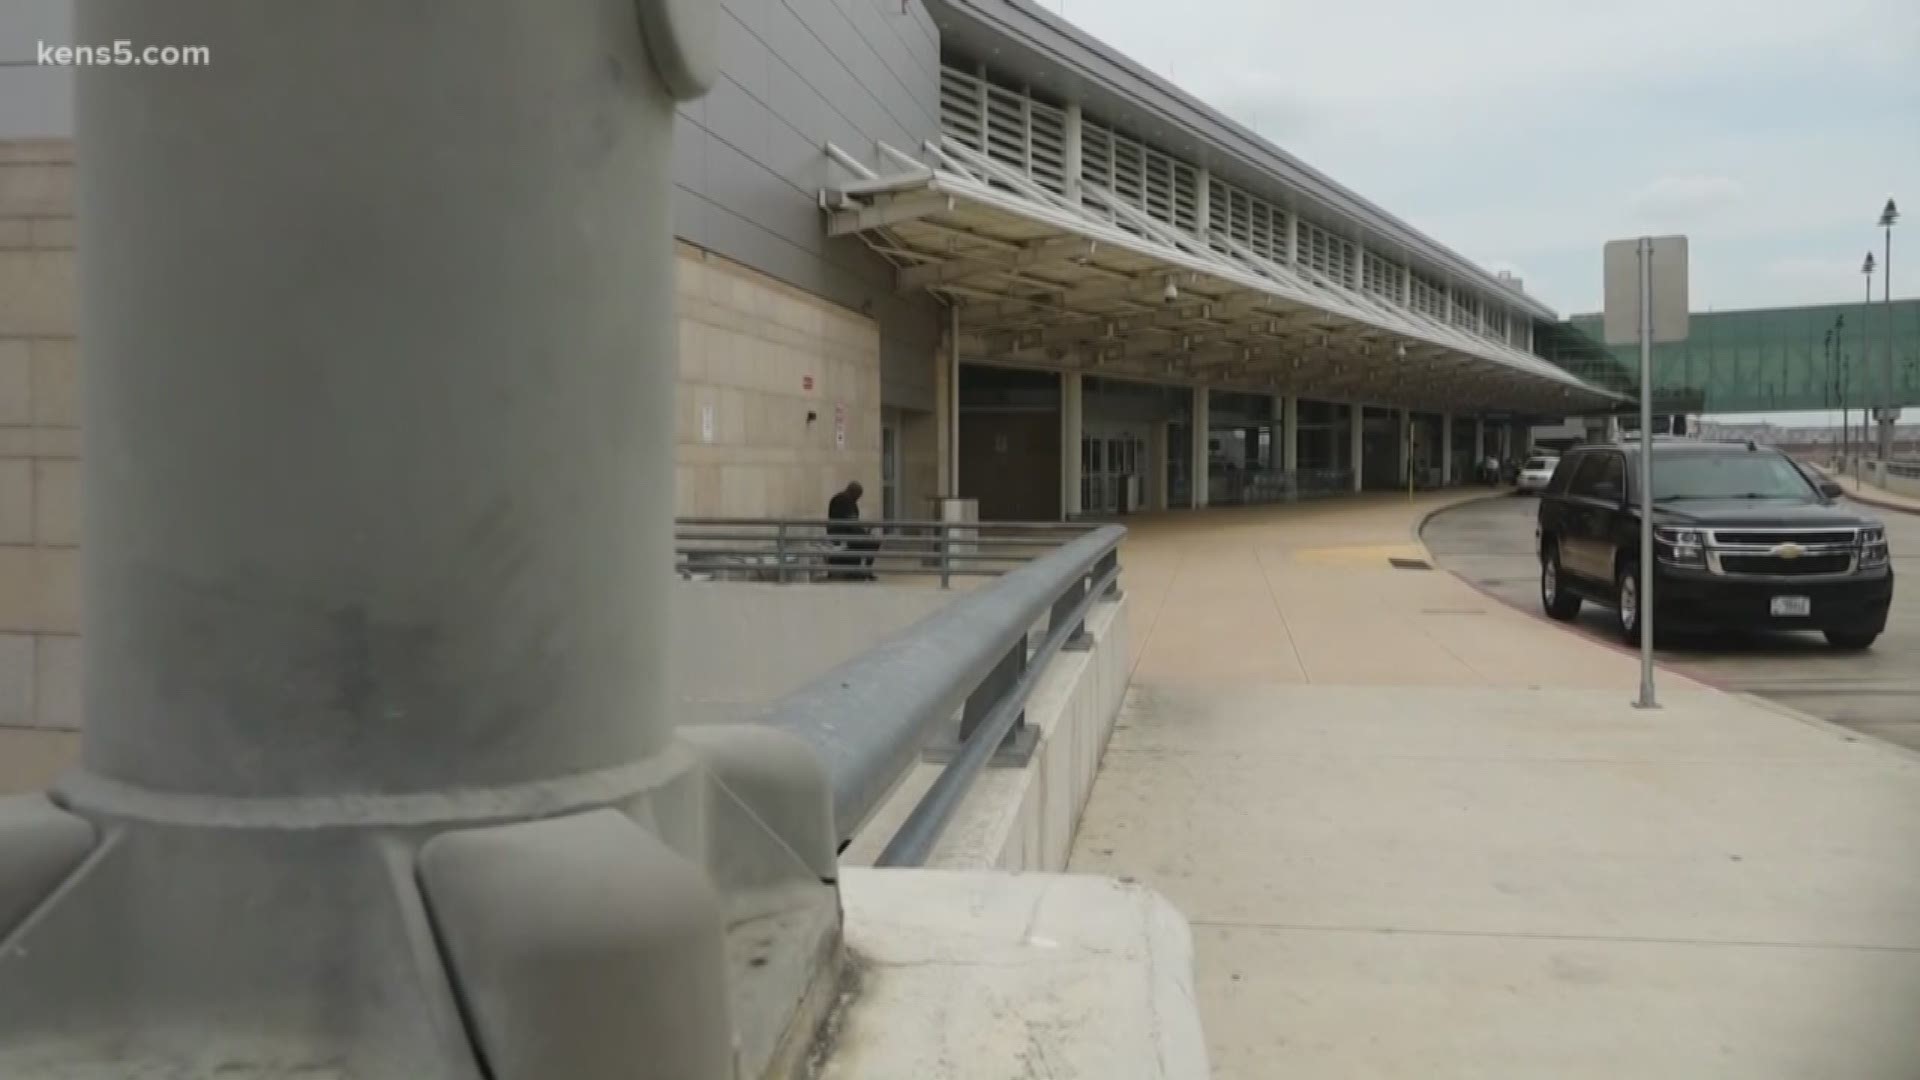 The airport says a cause has yet to be determined. An additional 500 residential and commercial locations were impacted at one point by the outage.